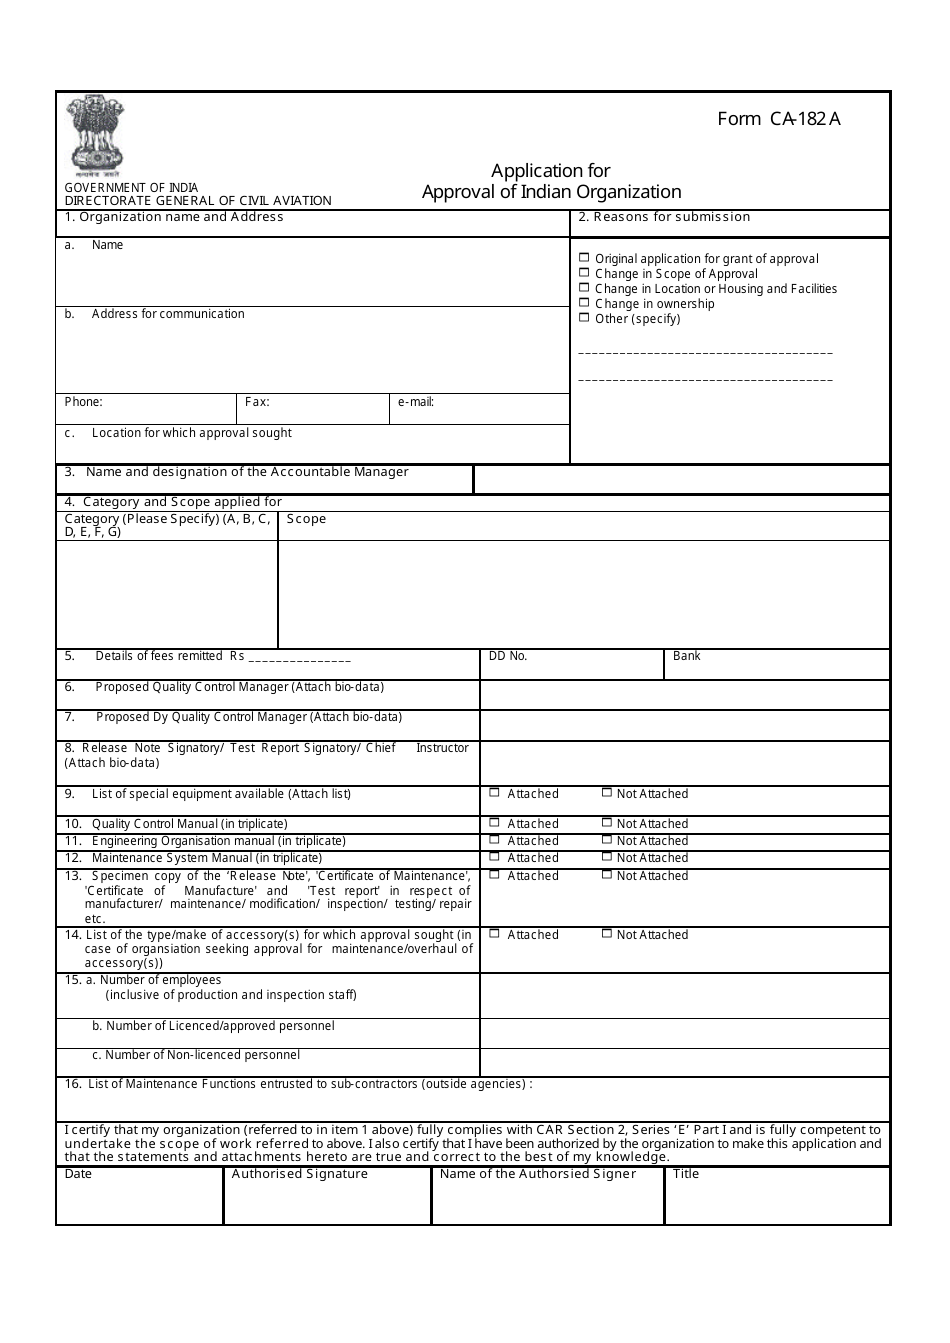 CA Form CA-182 A Application for Approval of Indian Organization - India, Page 1